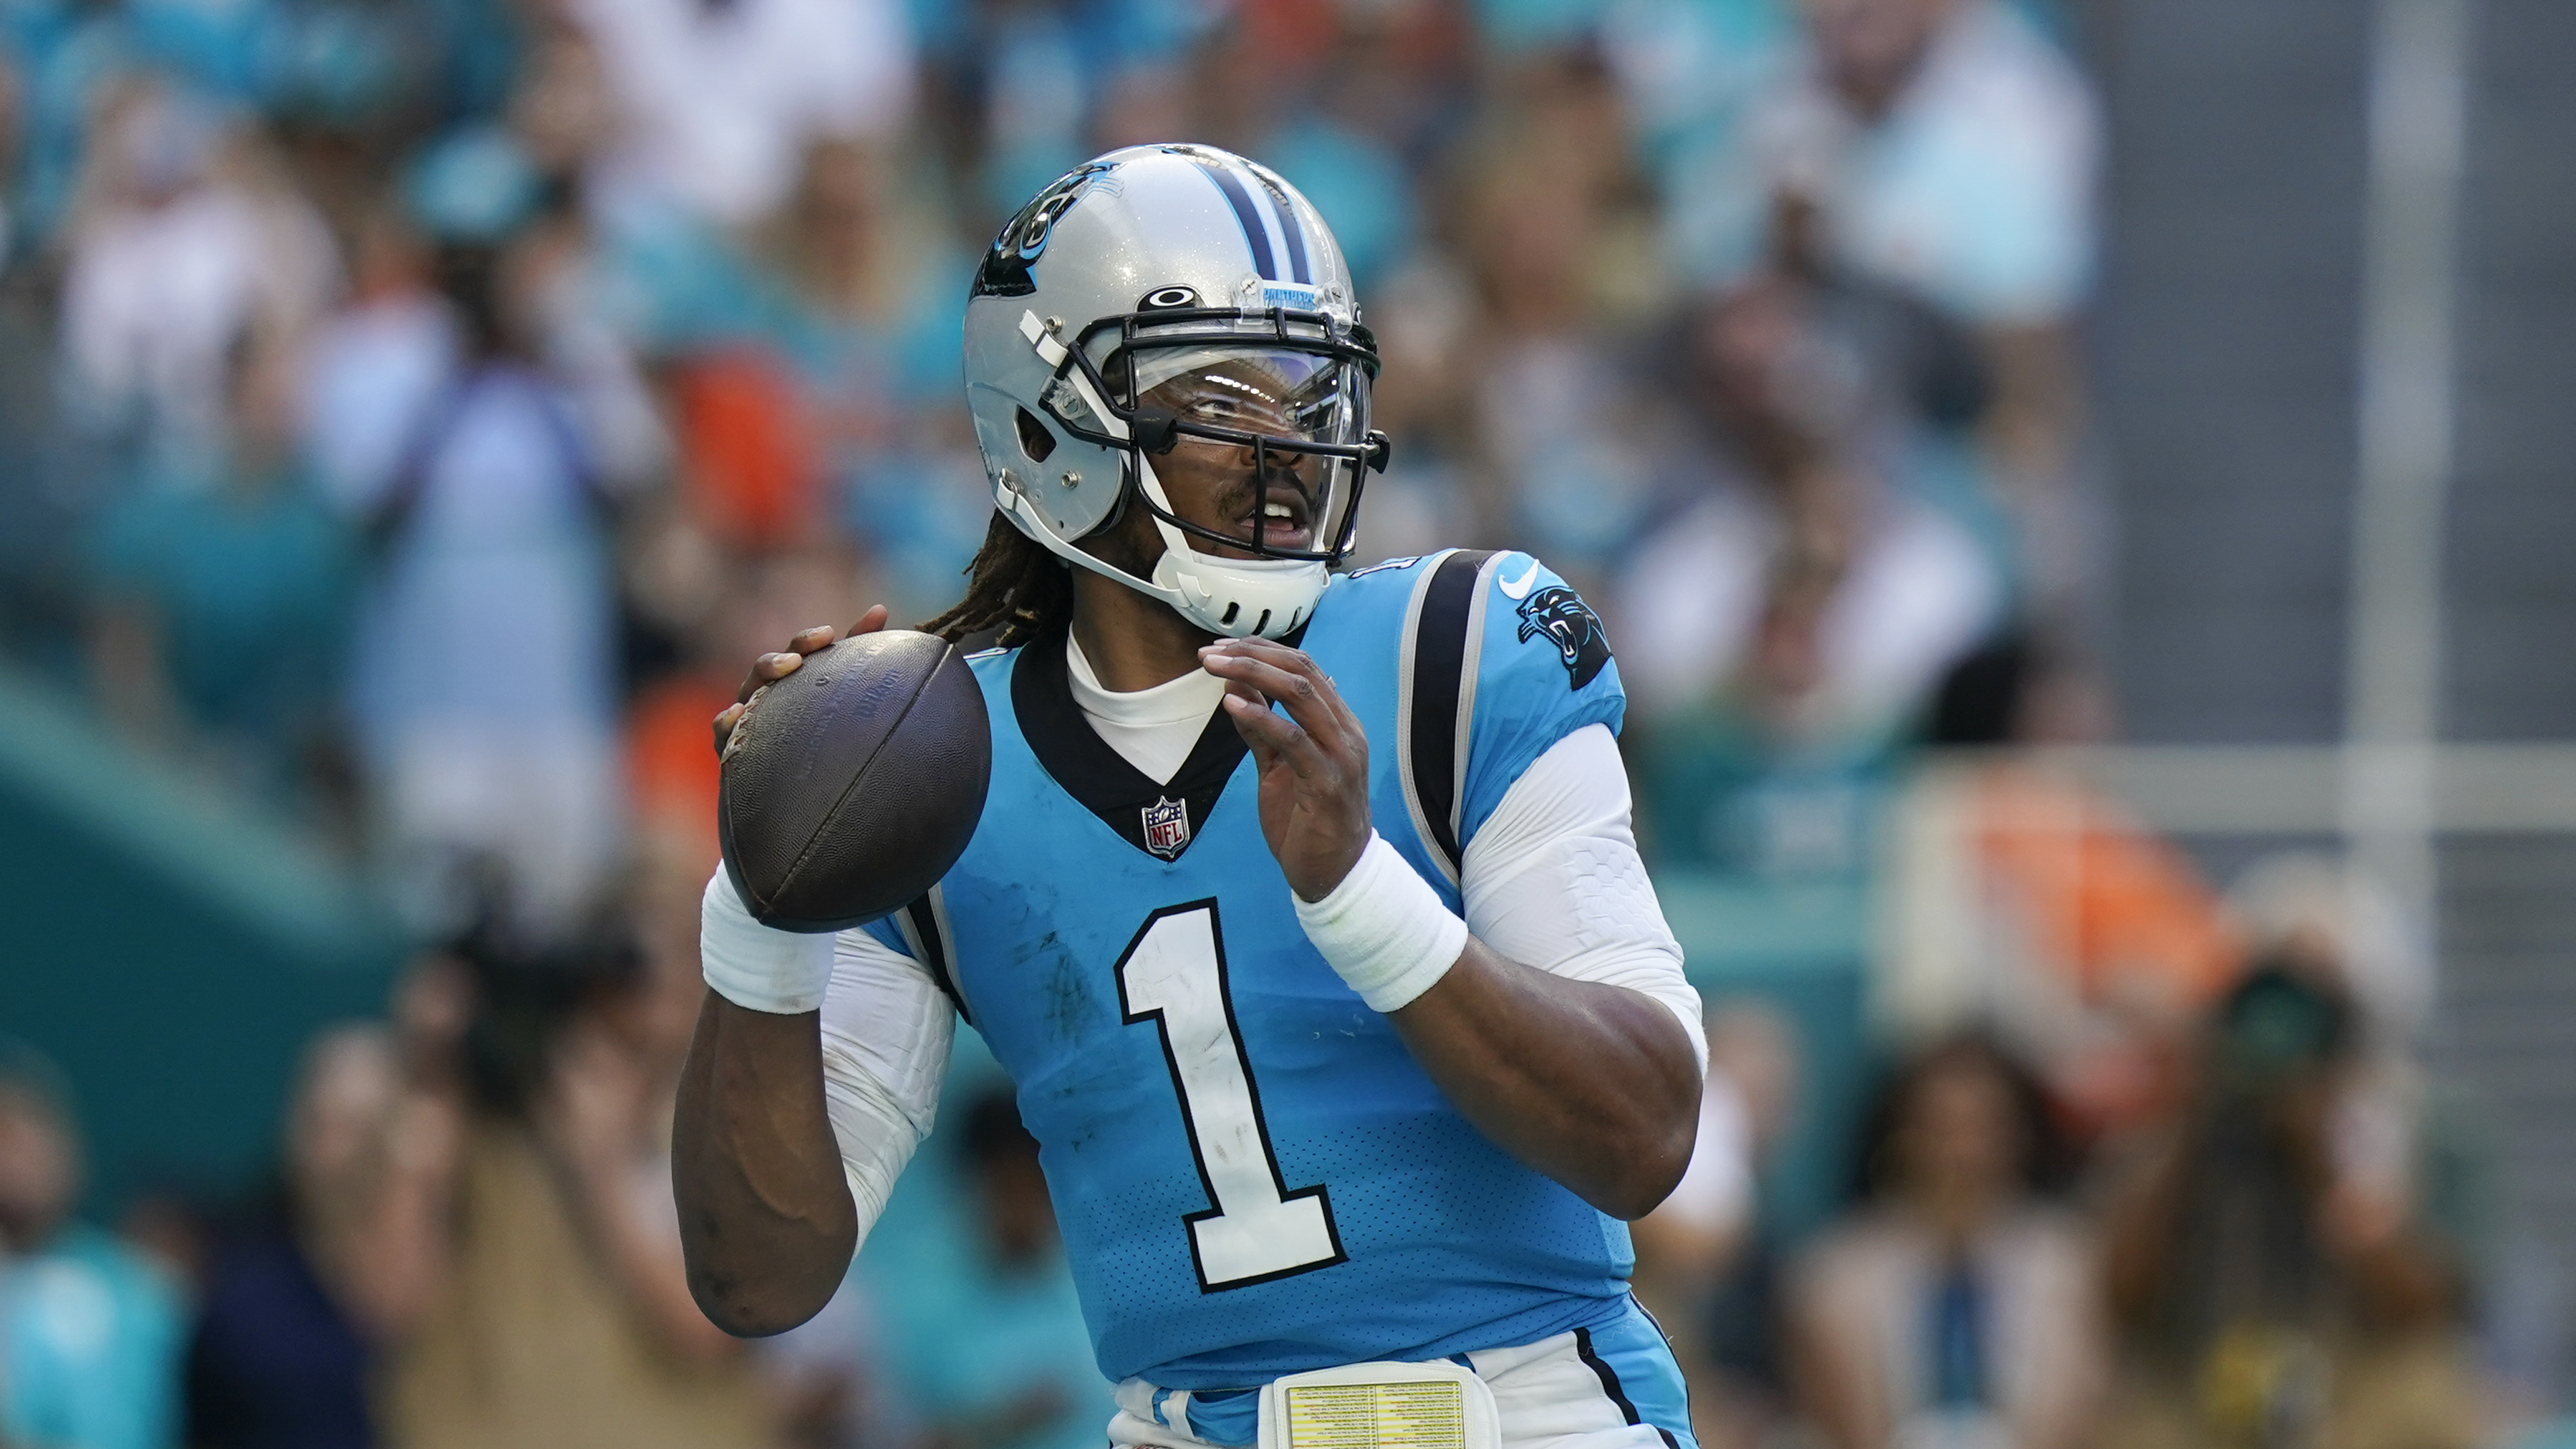 Cam Newton Benched by Panthers for P.J. Walker vs. Dolphins, Had Passer Rating of 5.8